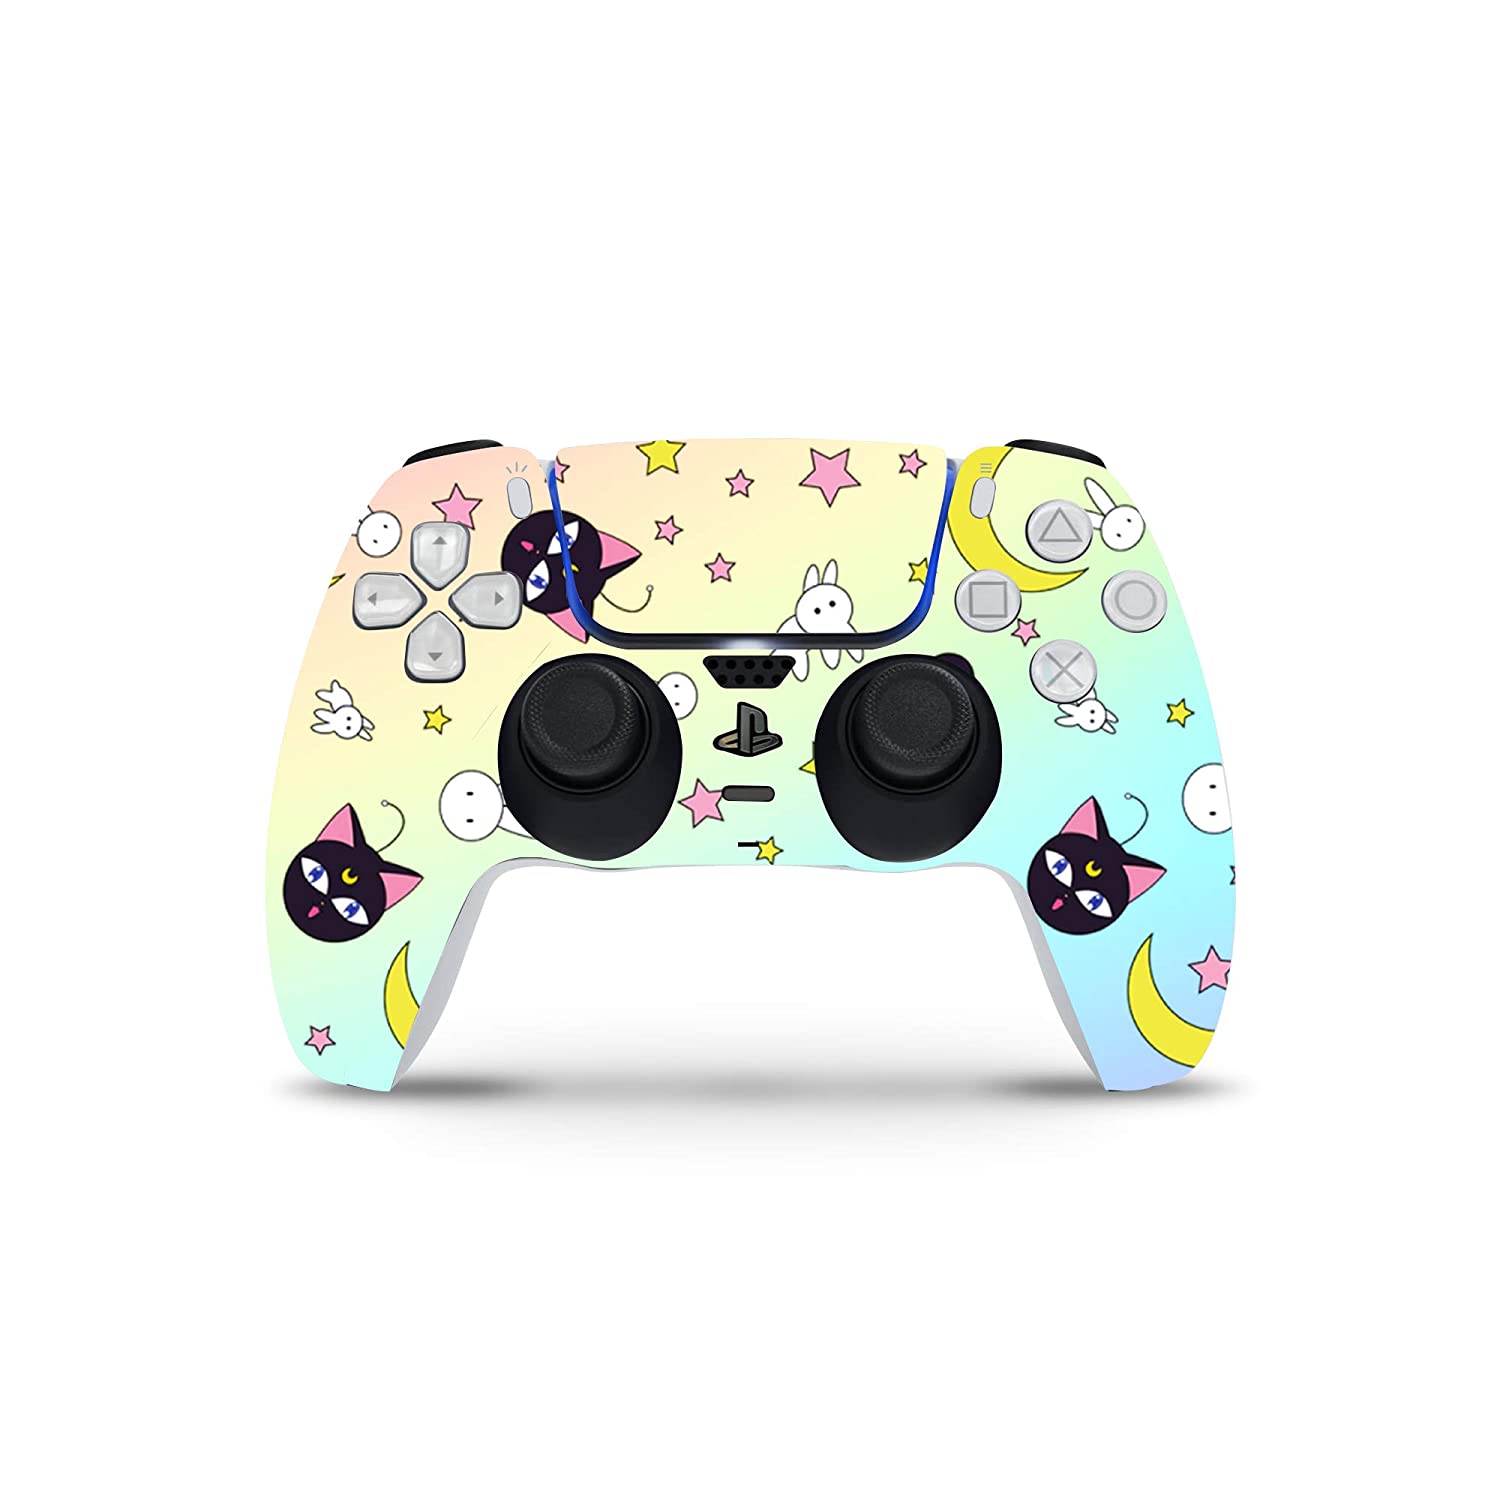 PS5 Controller Skin By ZOOMHITSKINS, Same Decal Quality For Cars, Moon Luna Sailor Anime Star Rabbit Kawaii, High Quality, Durable, Bubble Free, Compatible With PS5 Controllers, Made In USA, Video Games